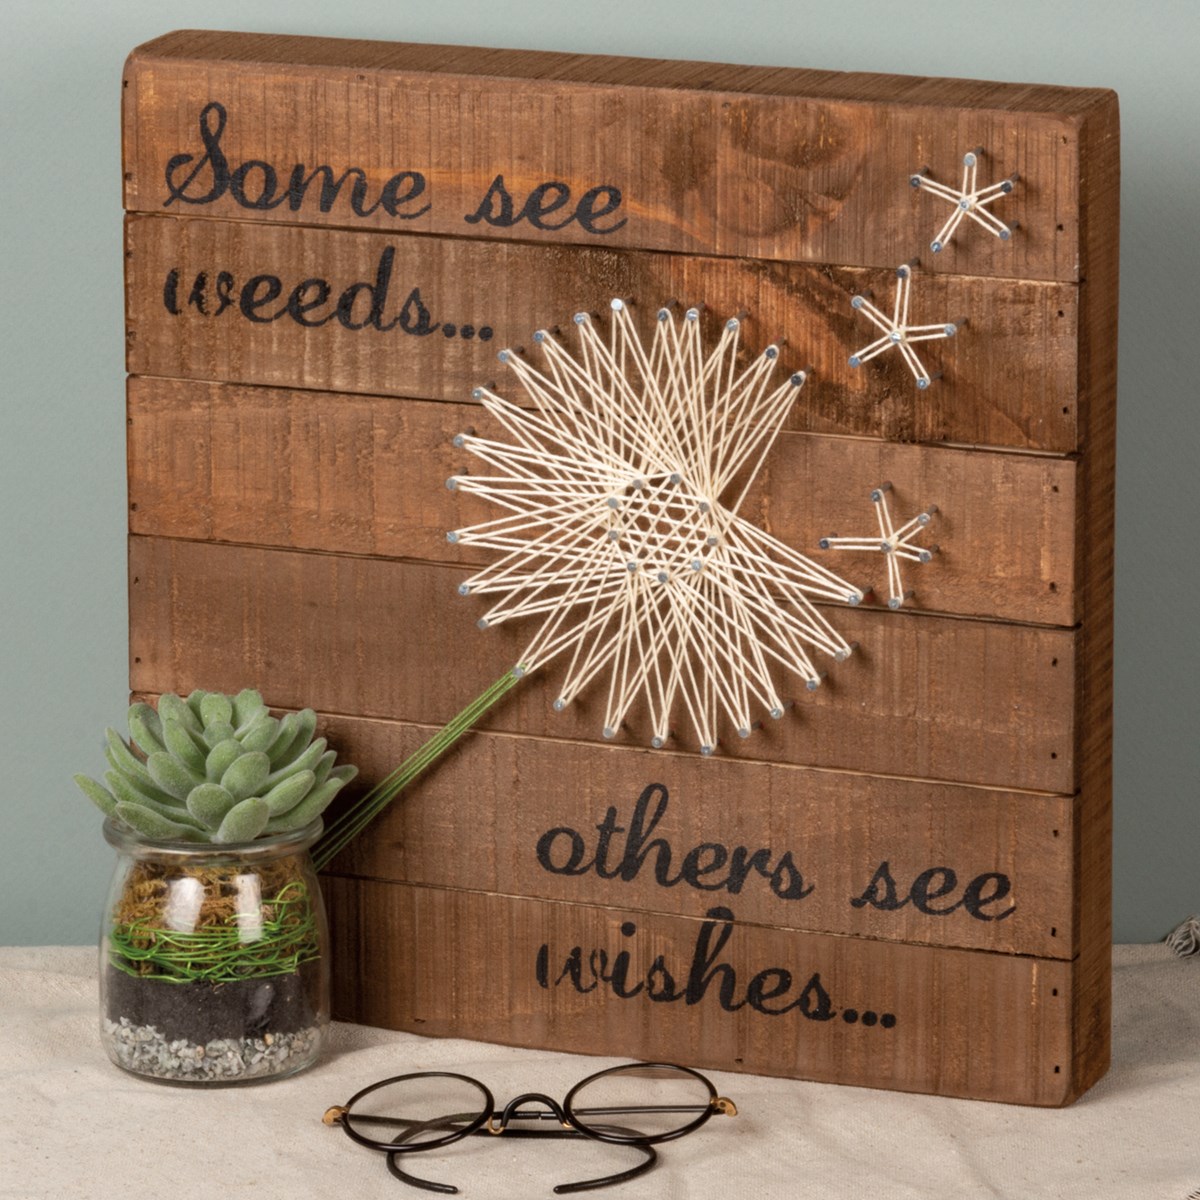 Some See Weeds… Others See Wishes... String Art - Wood, Metal, String